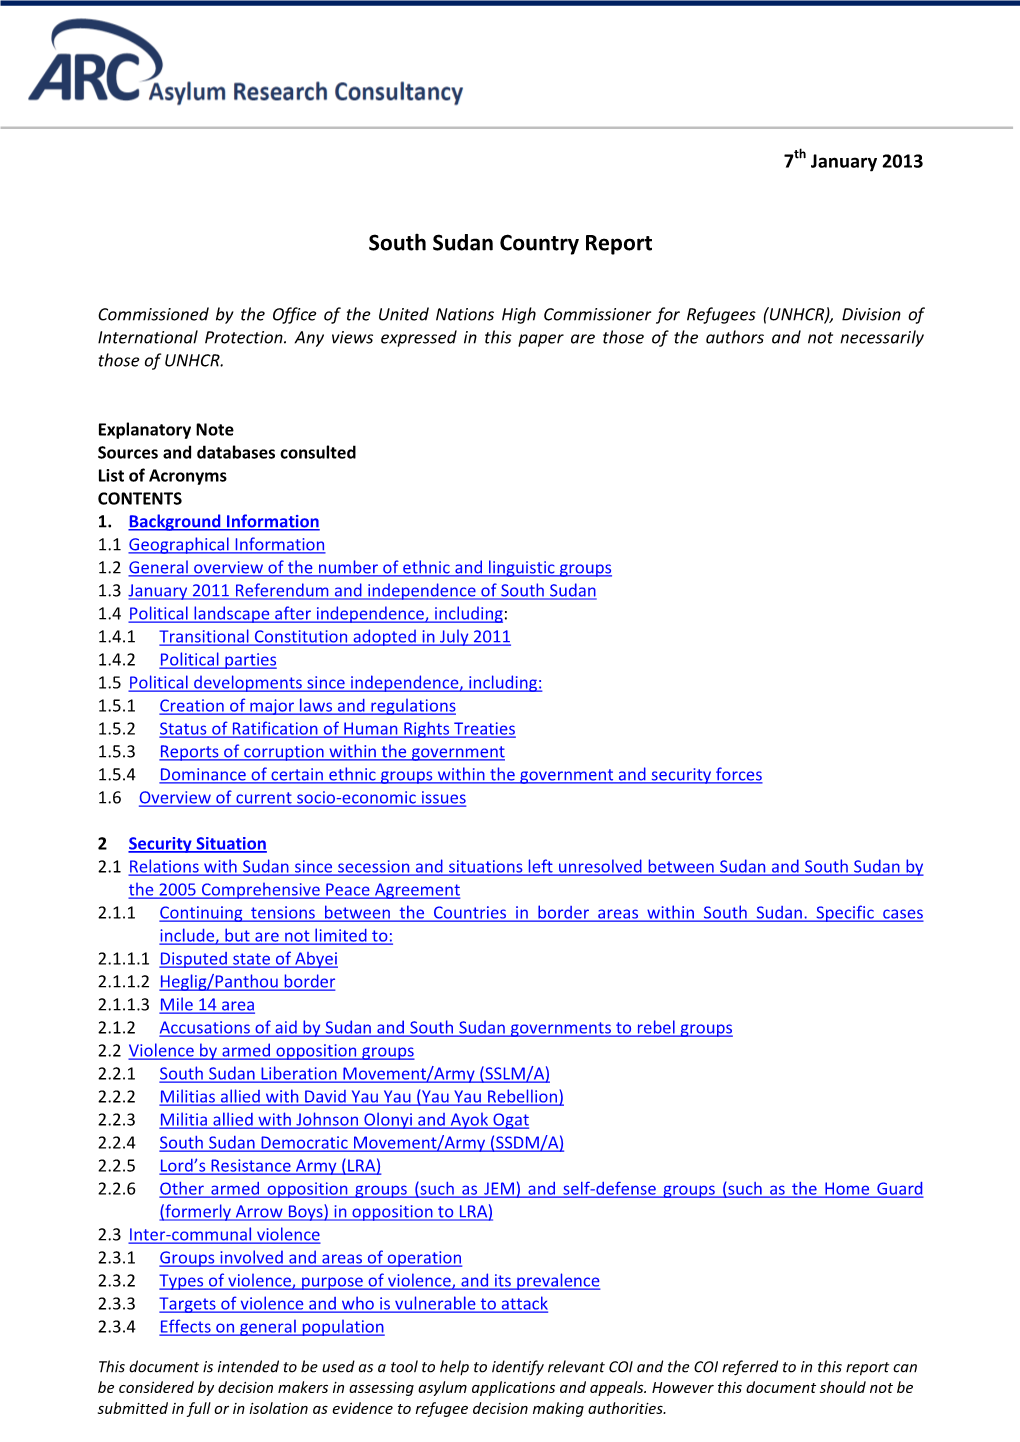 South Sudan Country Report